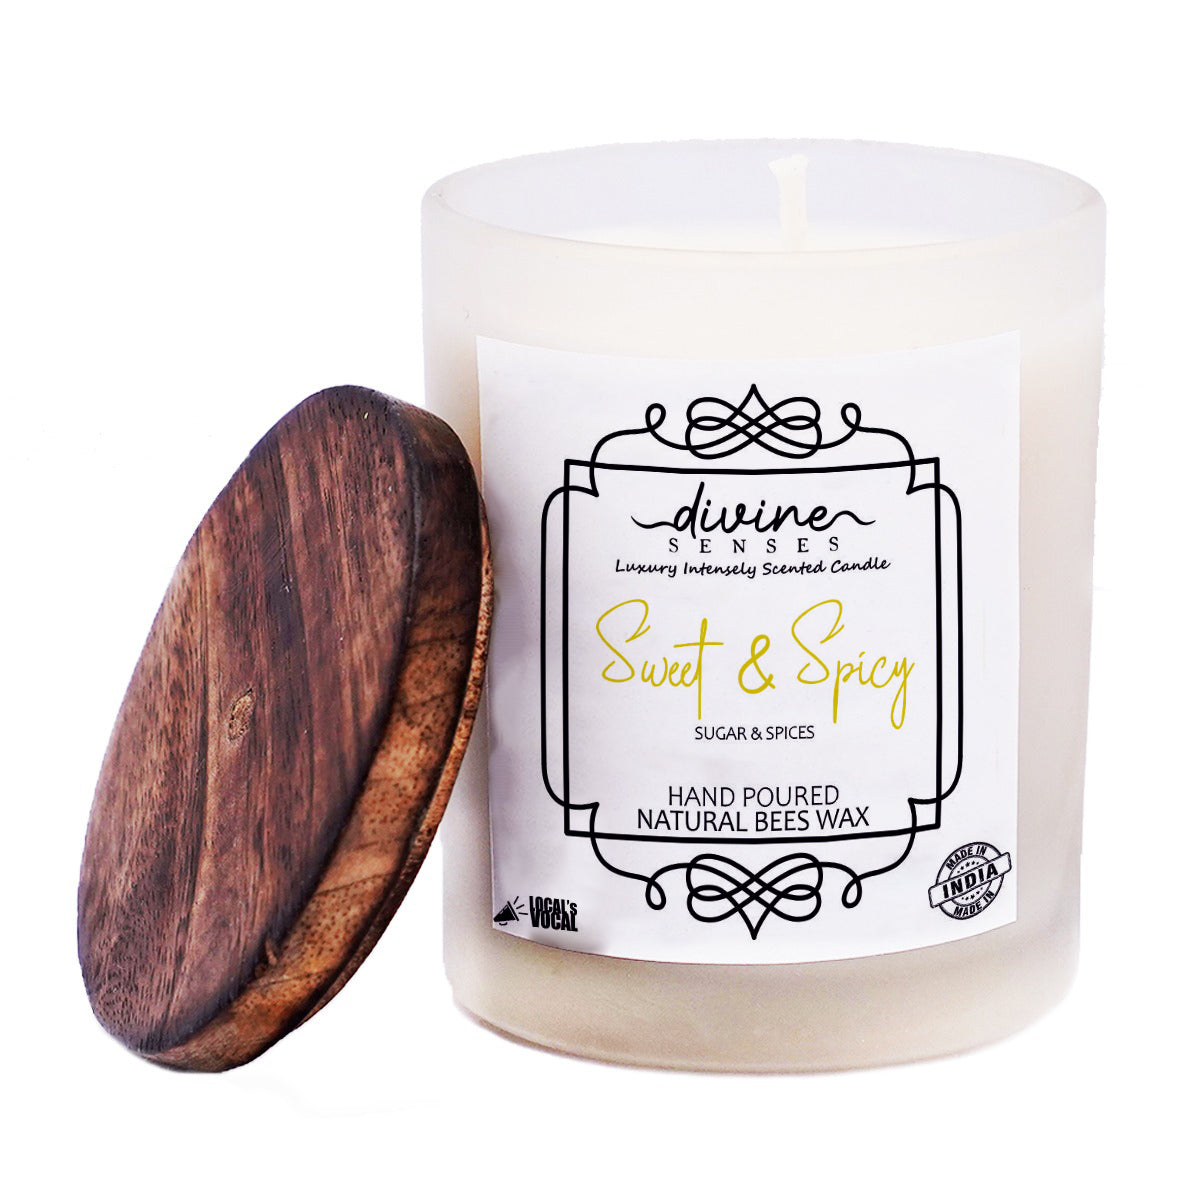 Sugar & spice intensely scented Natural Beeswax Candle